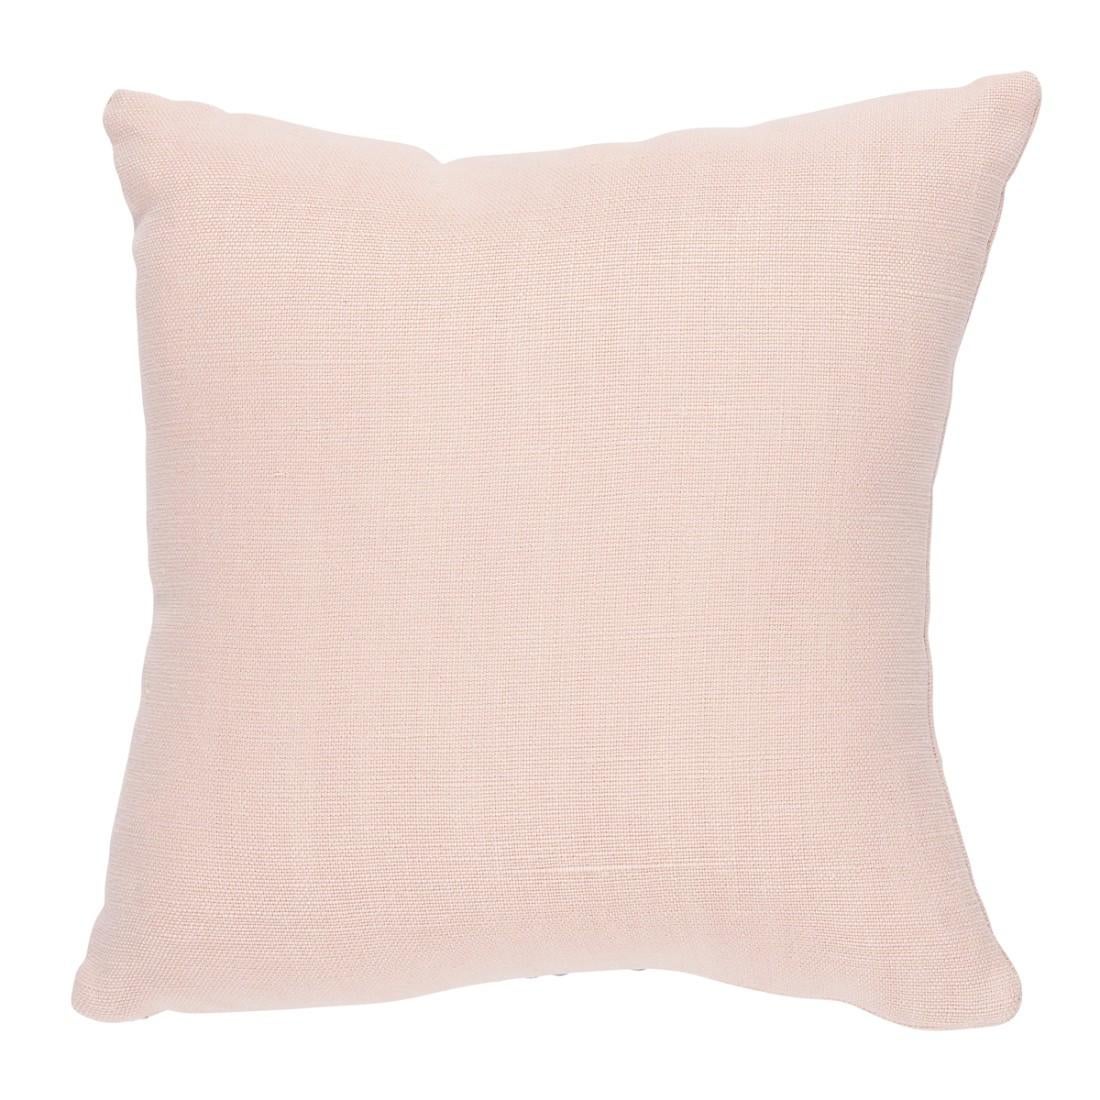 This pillow features Ashoka Tape with a Knife Edge finish. With a winding, embroidered floral design accentuated with French Knots, Ashoka Tape adds an element of handcrafted beauty. Body of pillow is Piet Performance Linen. Pillow includes a